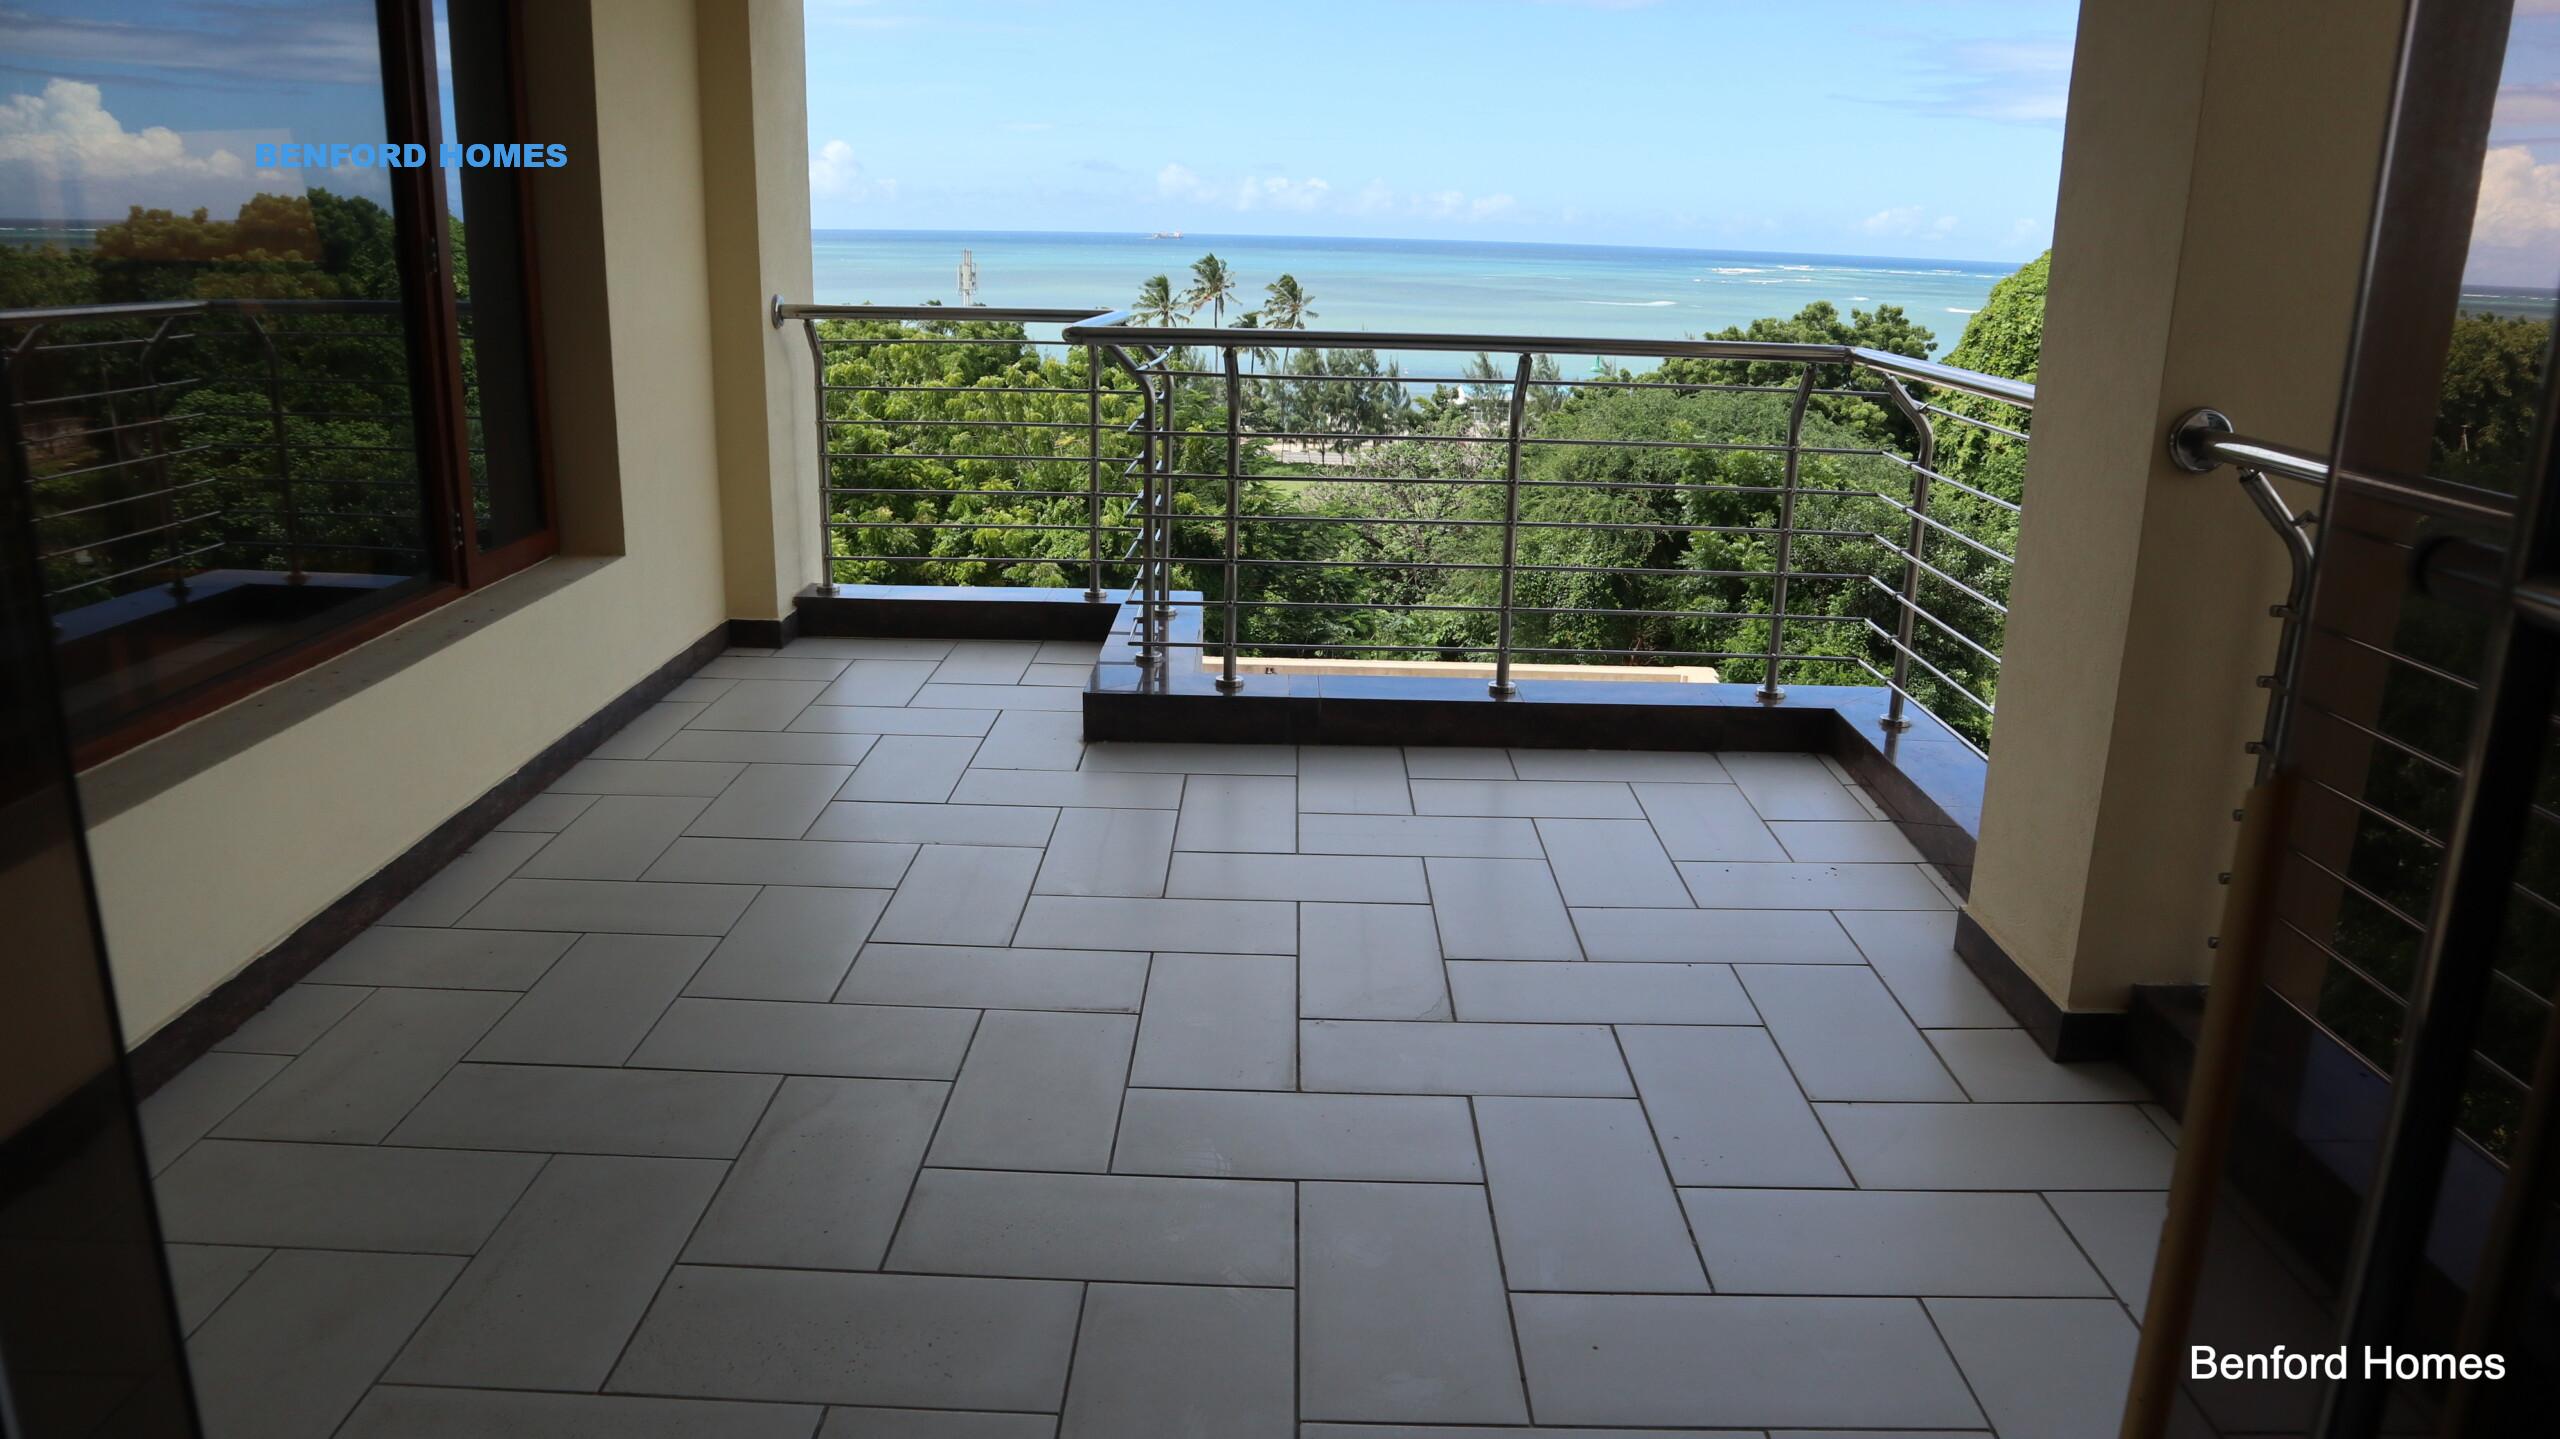 A portion of the balcony's railing frames the scene, hinting a lush canopy of trees and expansive ocean| Benford Homes